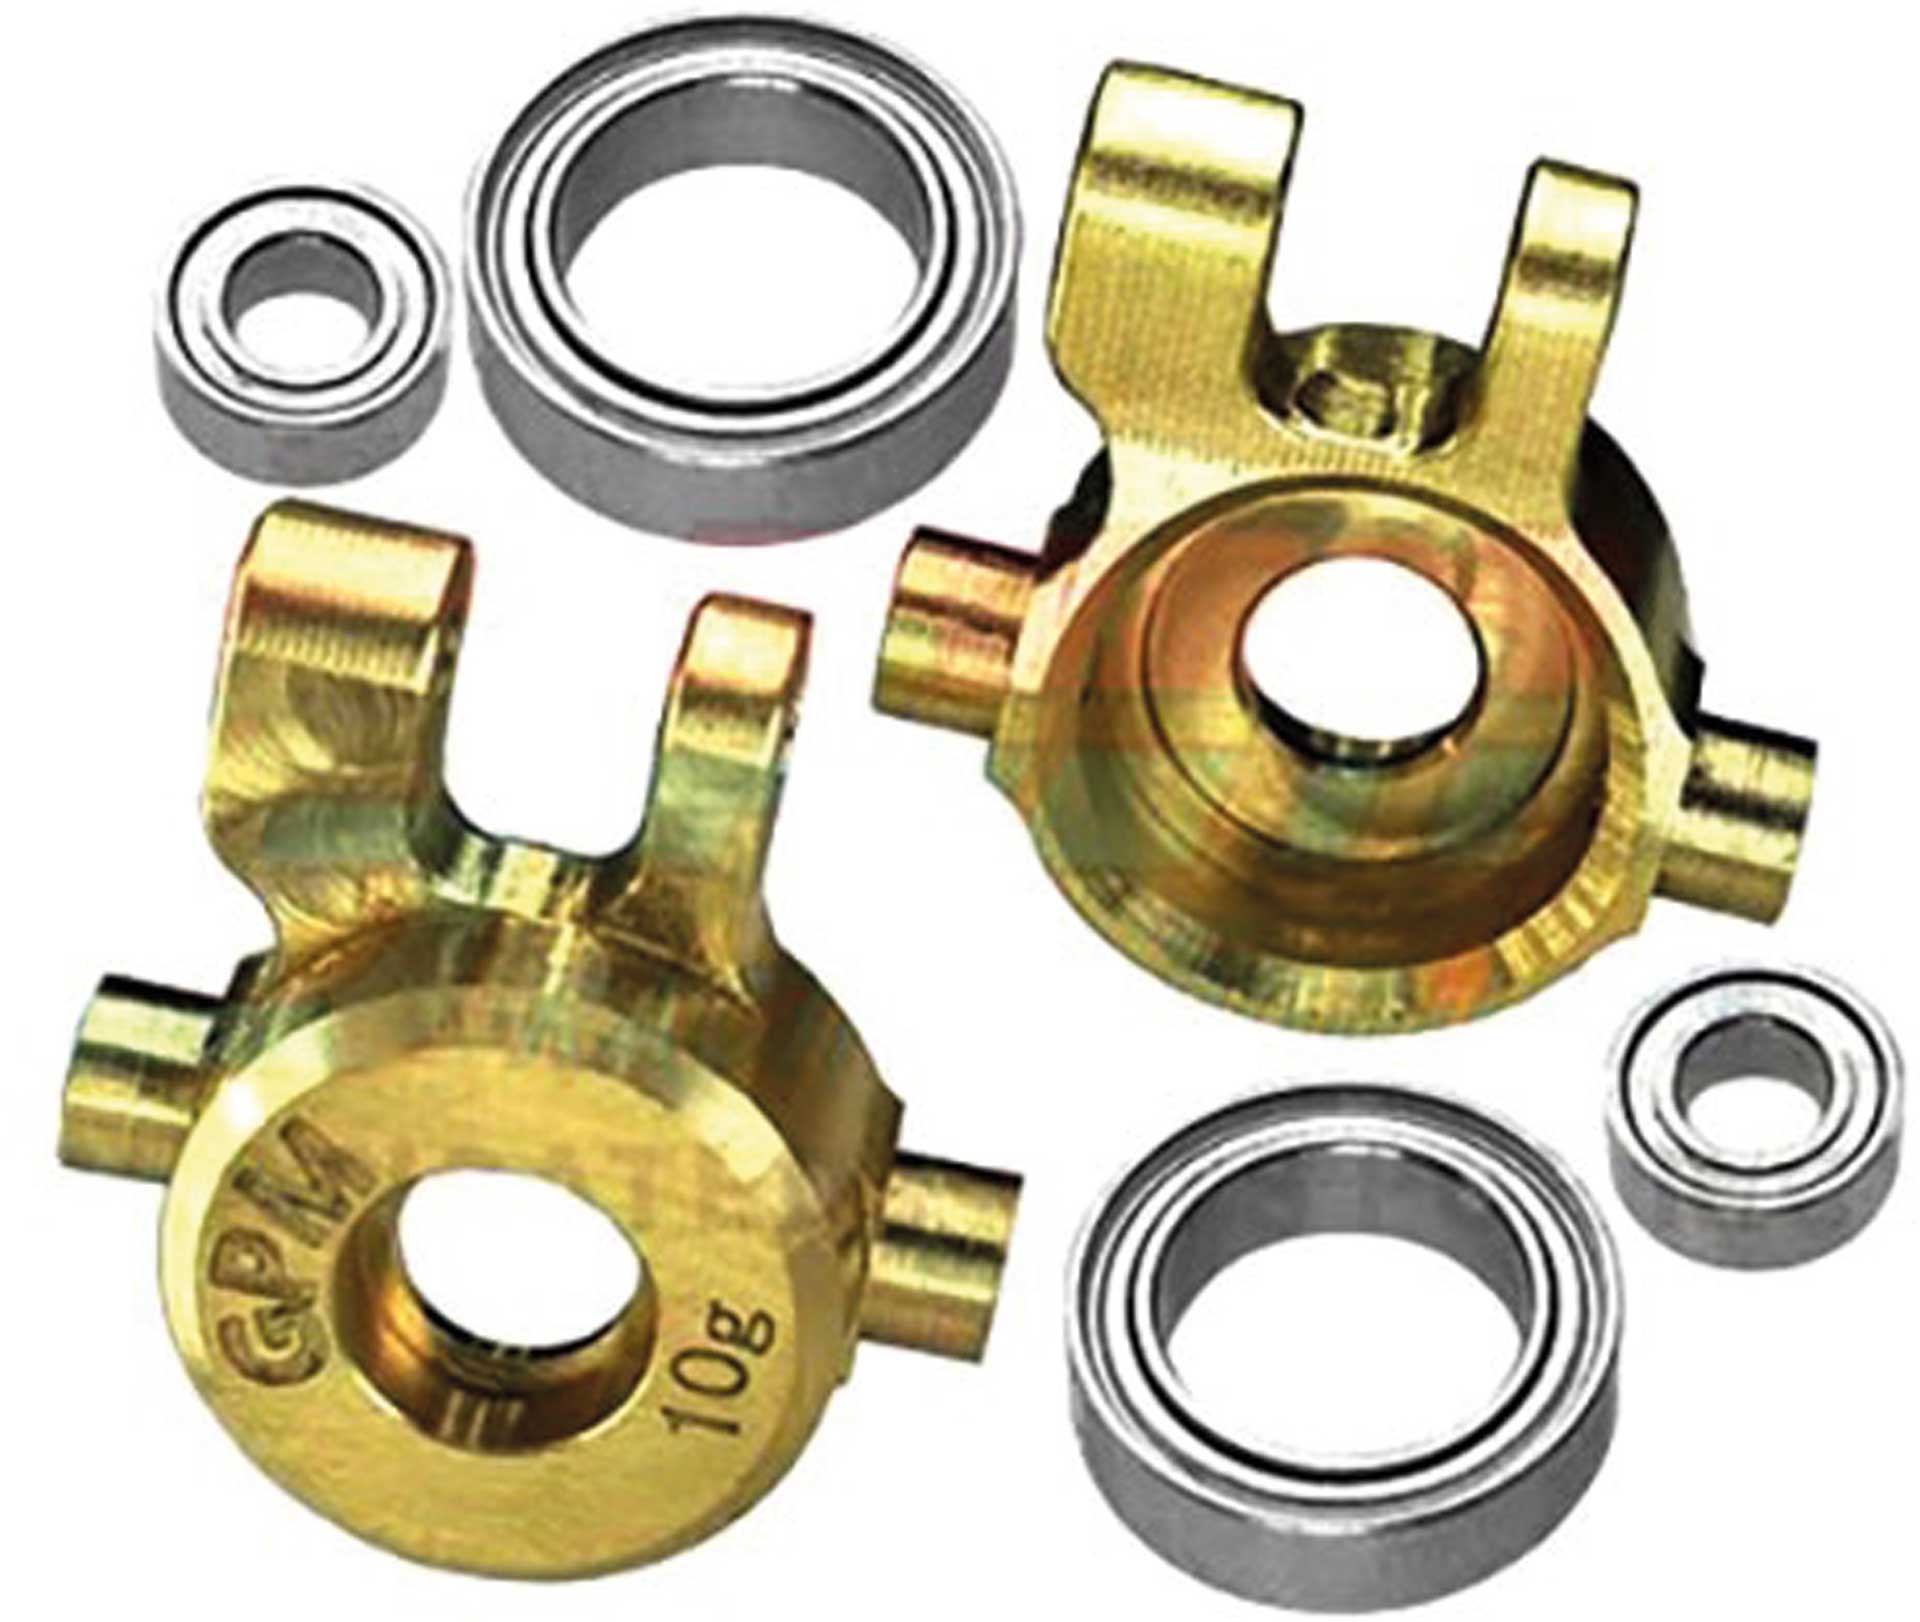 GPM Steering arm brass with ball bearing front (10g each) TRX-4M